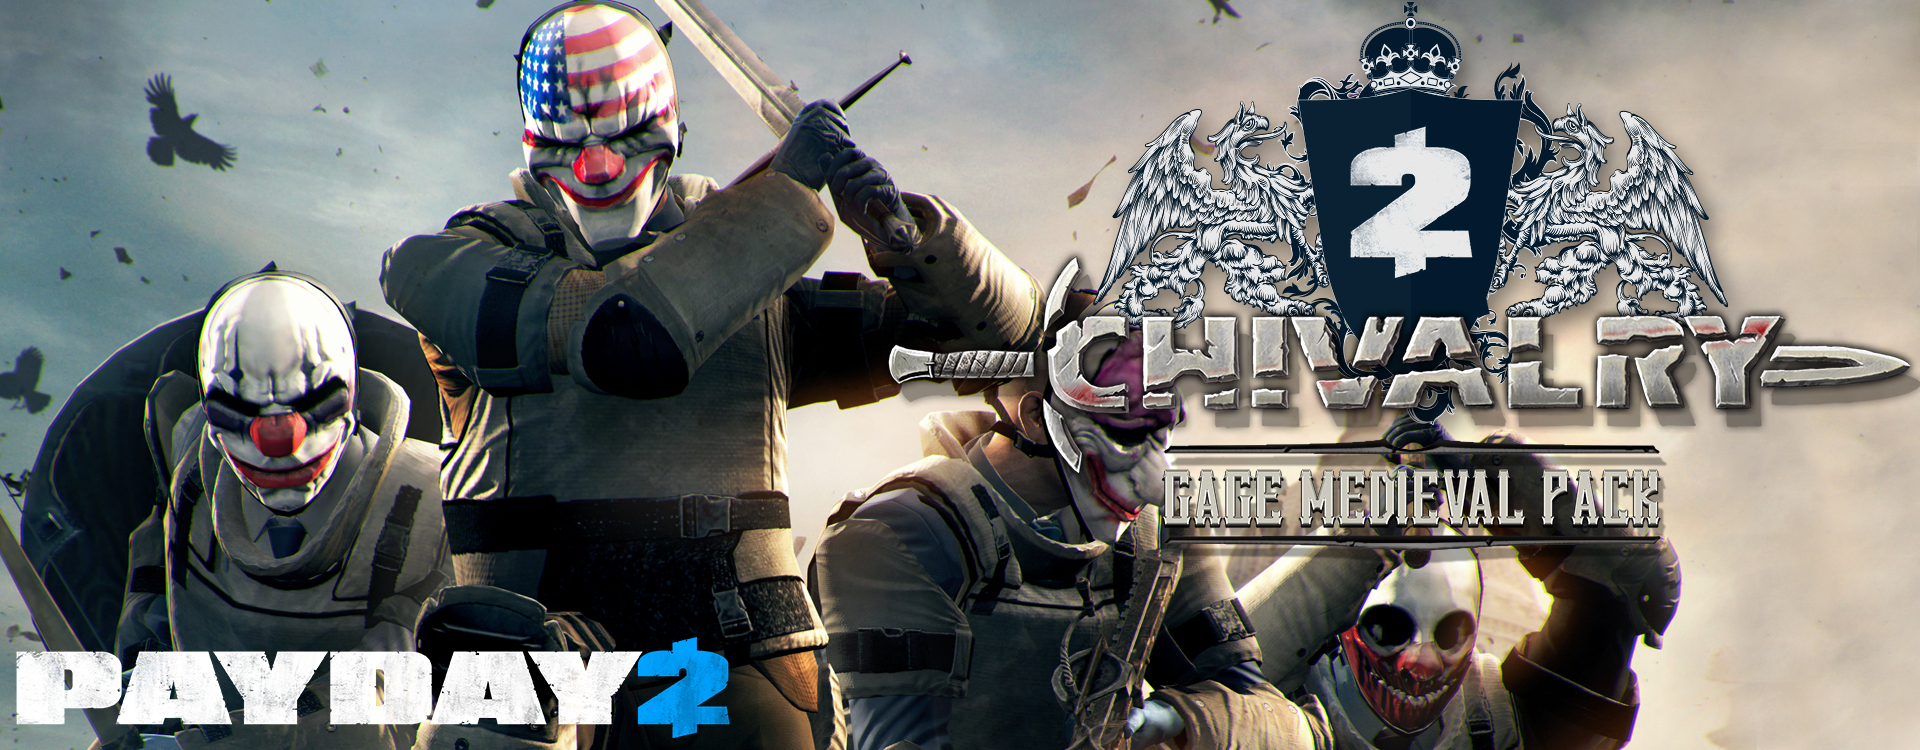 Payday 2 длс. Payday 2. Payday 2 Gage. Payday 2 DLC. Персонажи игры payday 2.